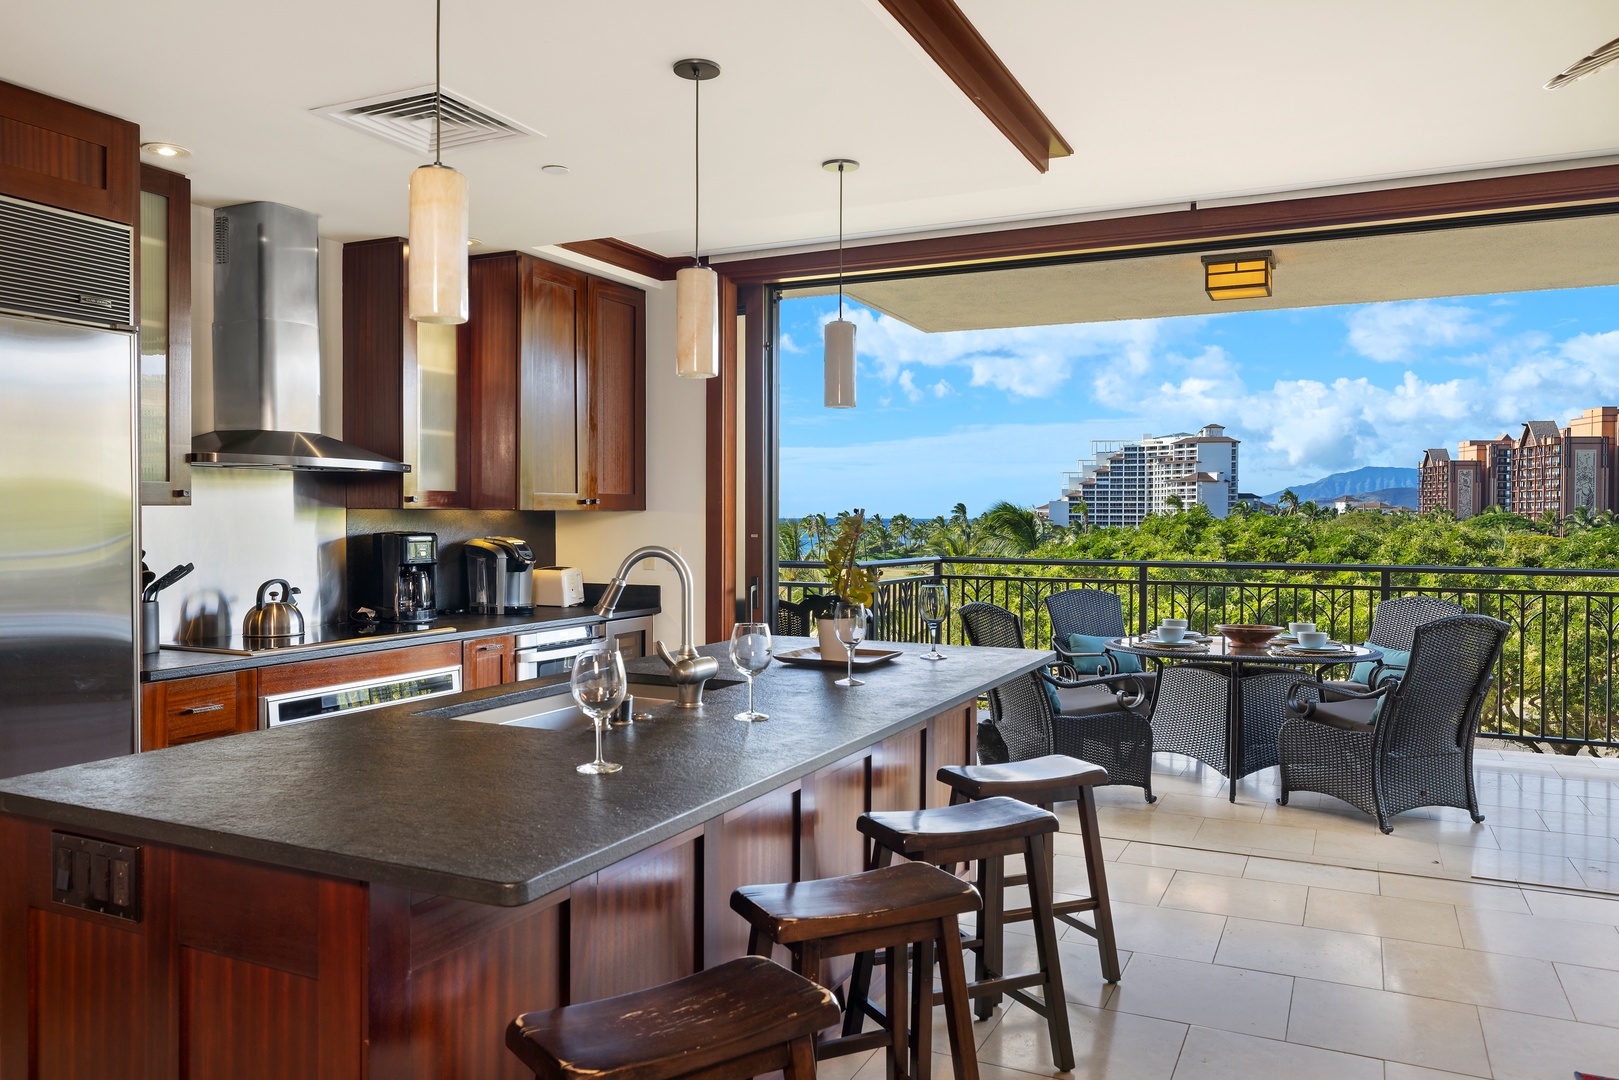 Kapolei Vacation Rentals, Ko Olina Beach Villas B506 - The best view a chef could dream of from the fully equipped kitchen.